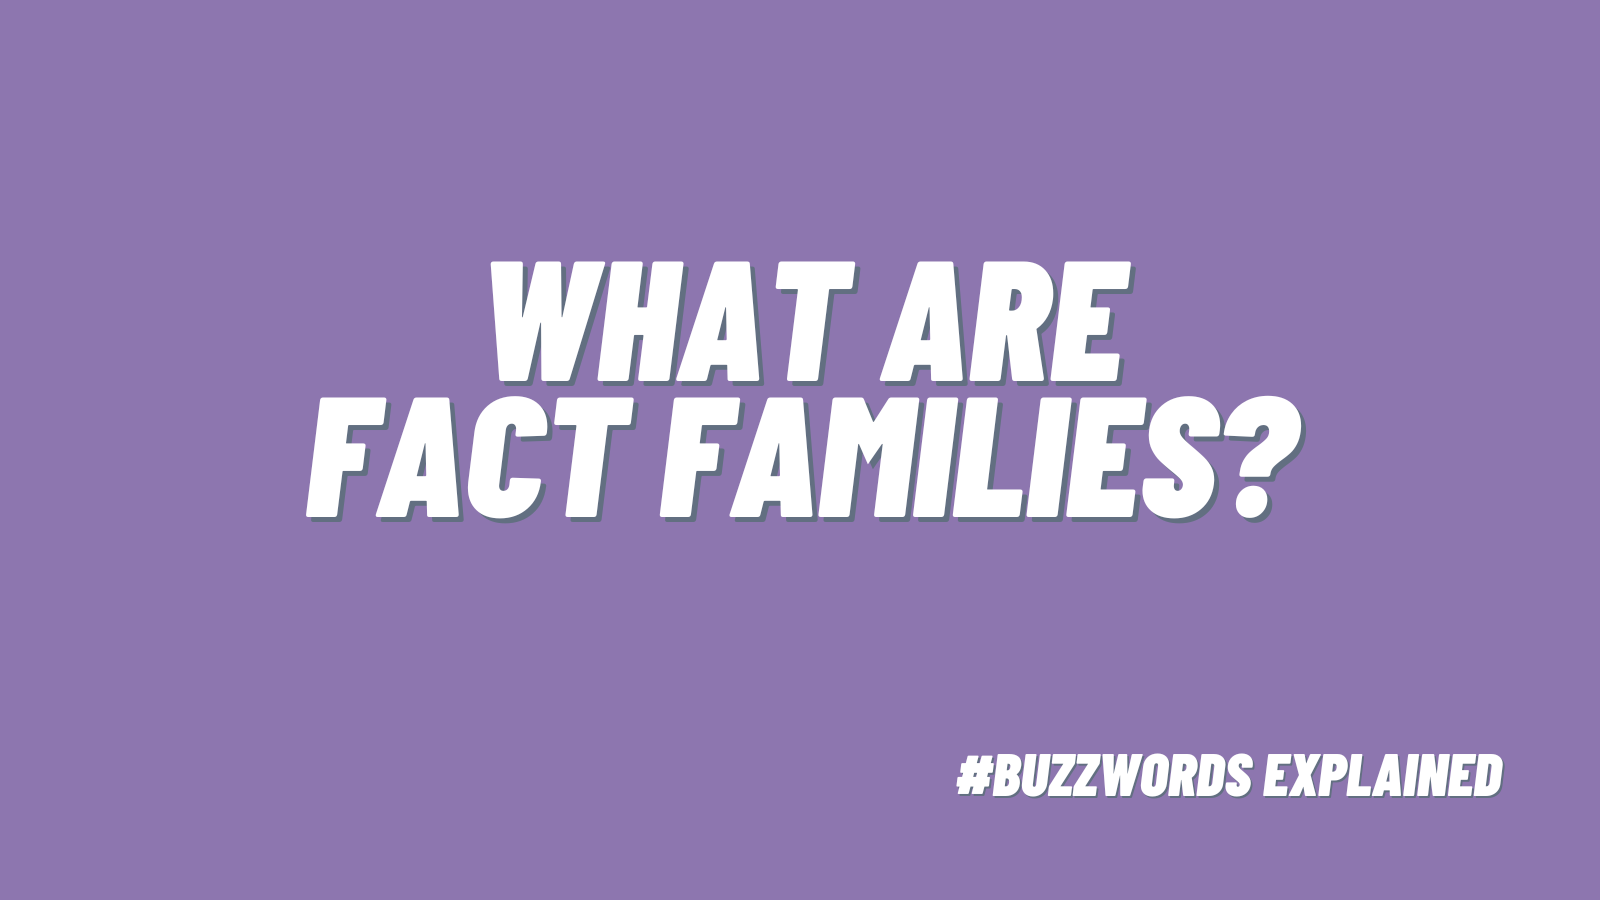 What are fact families? Buzz words explained